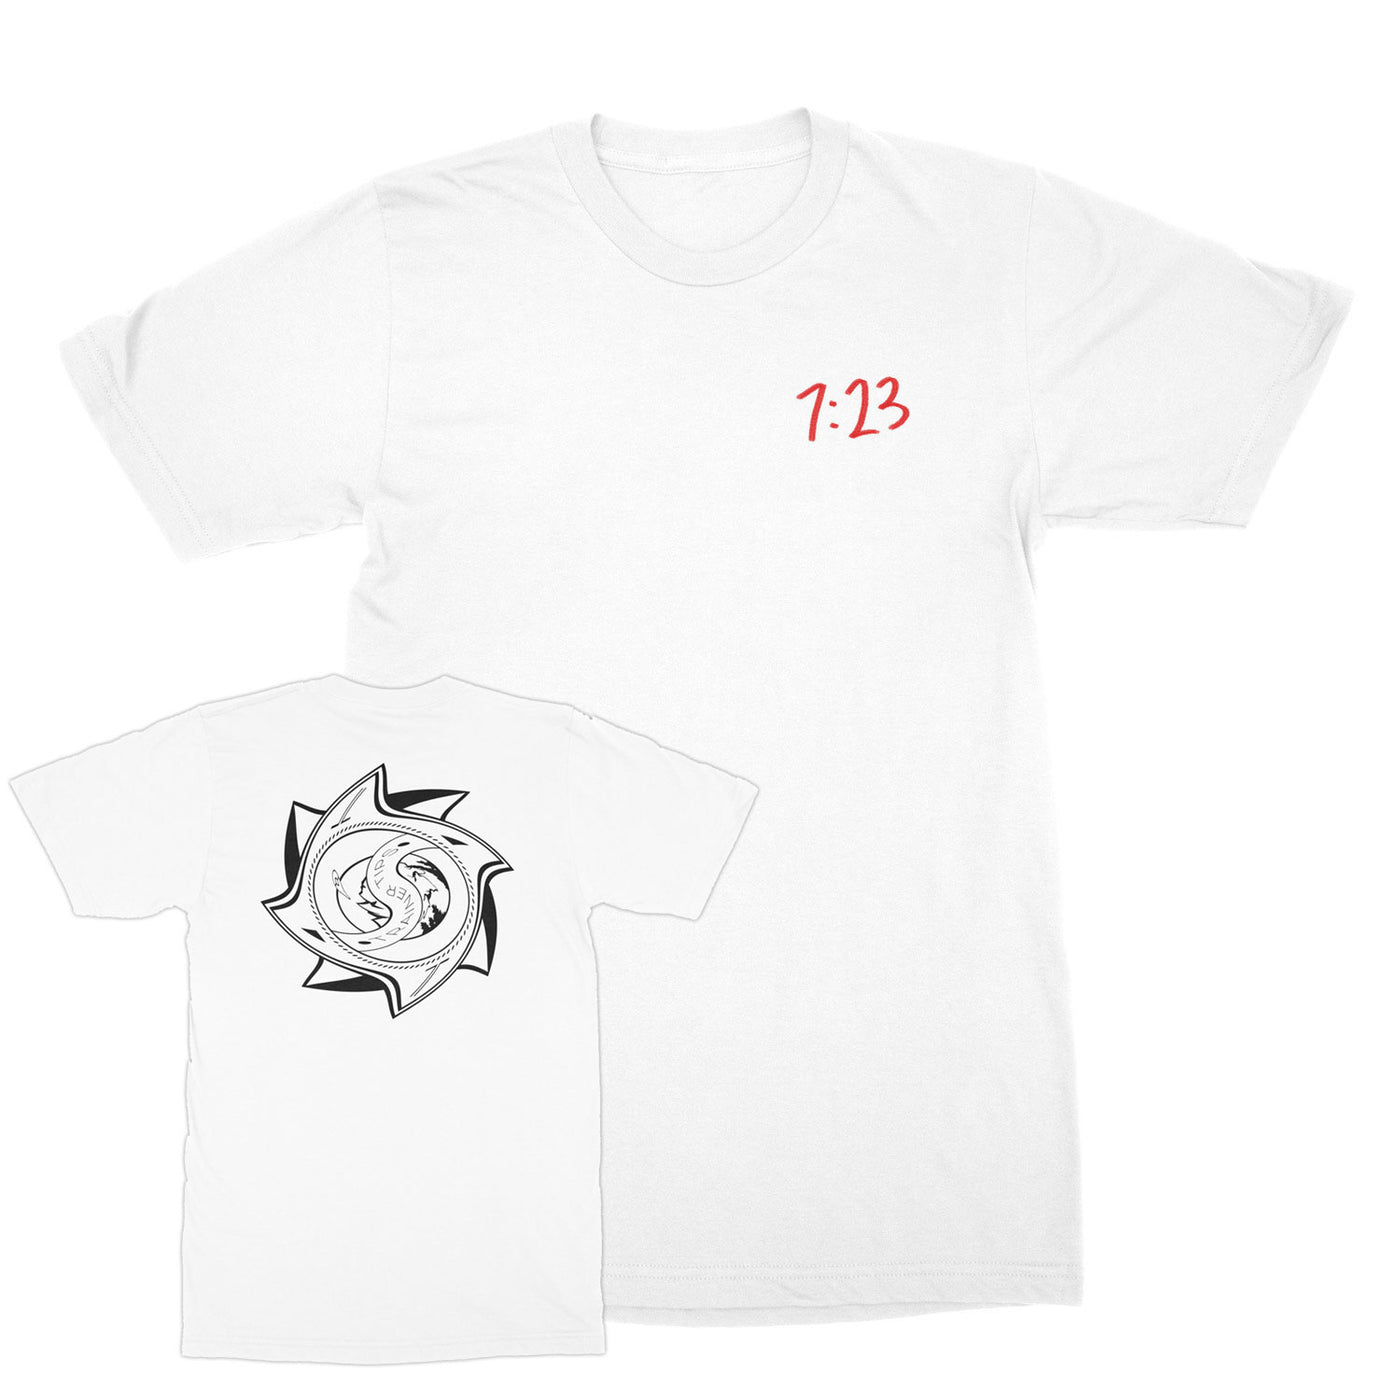 7:23 Double Sided T-Shirt